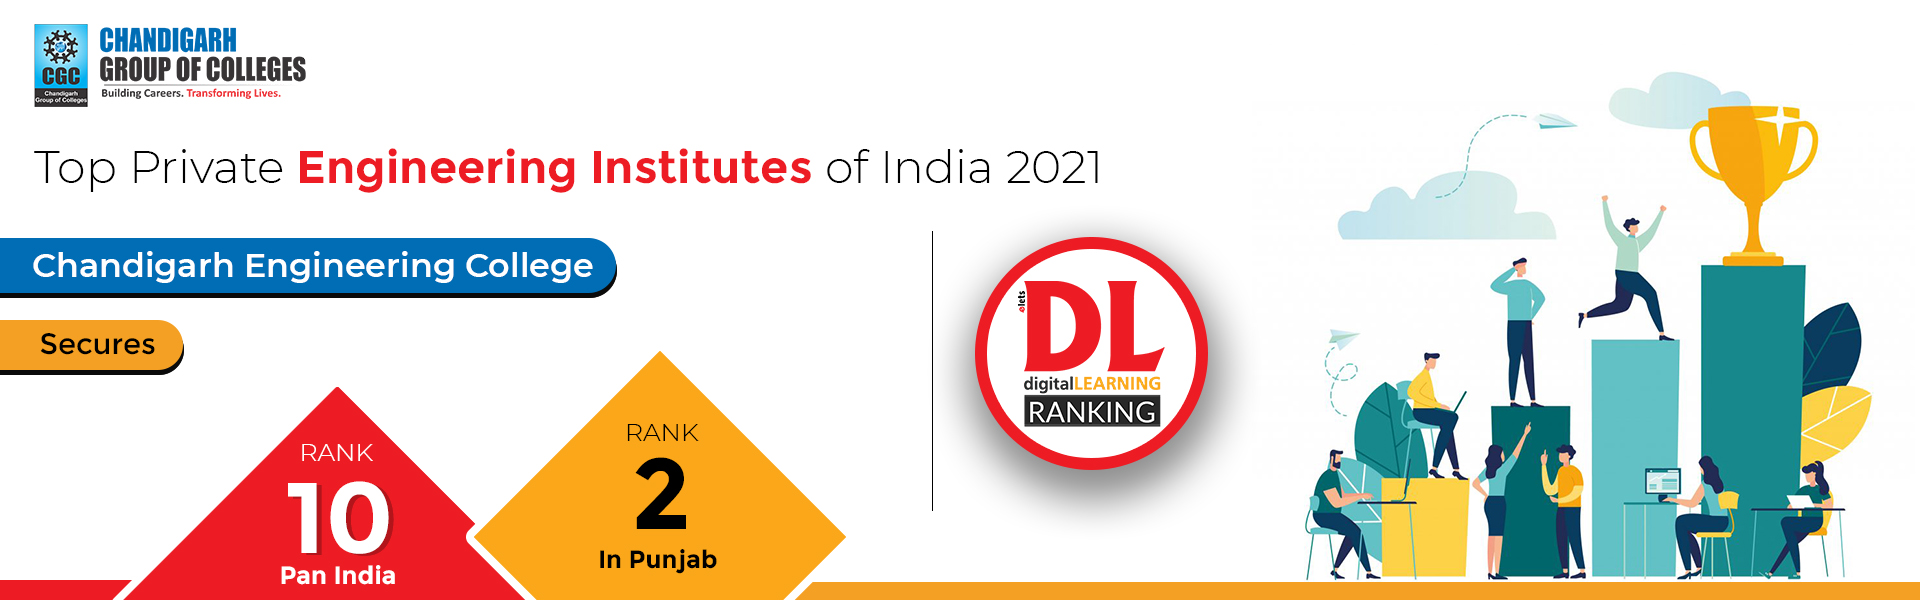 Chandigarh Engineering College secures Top positions in Digital Learning’s Ranking 2021 